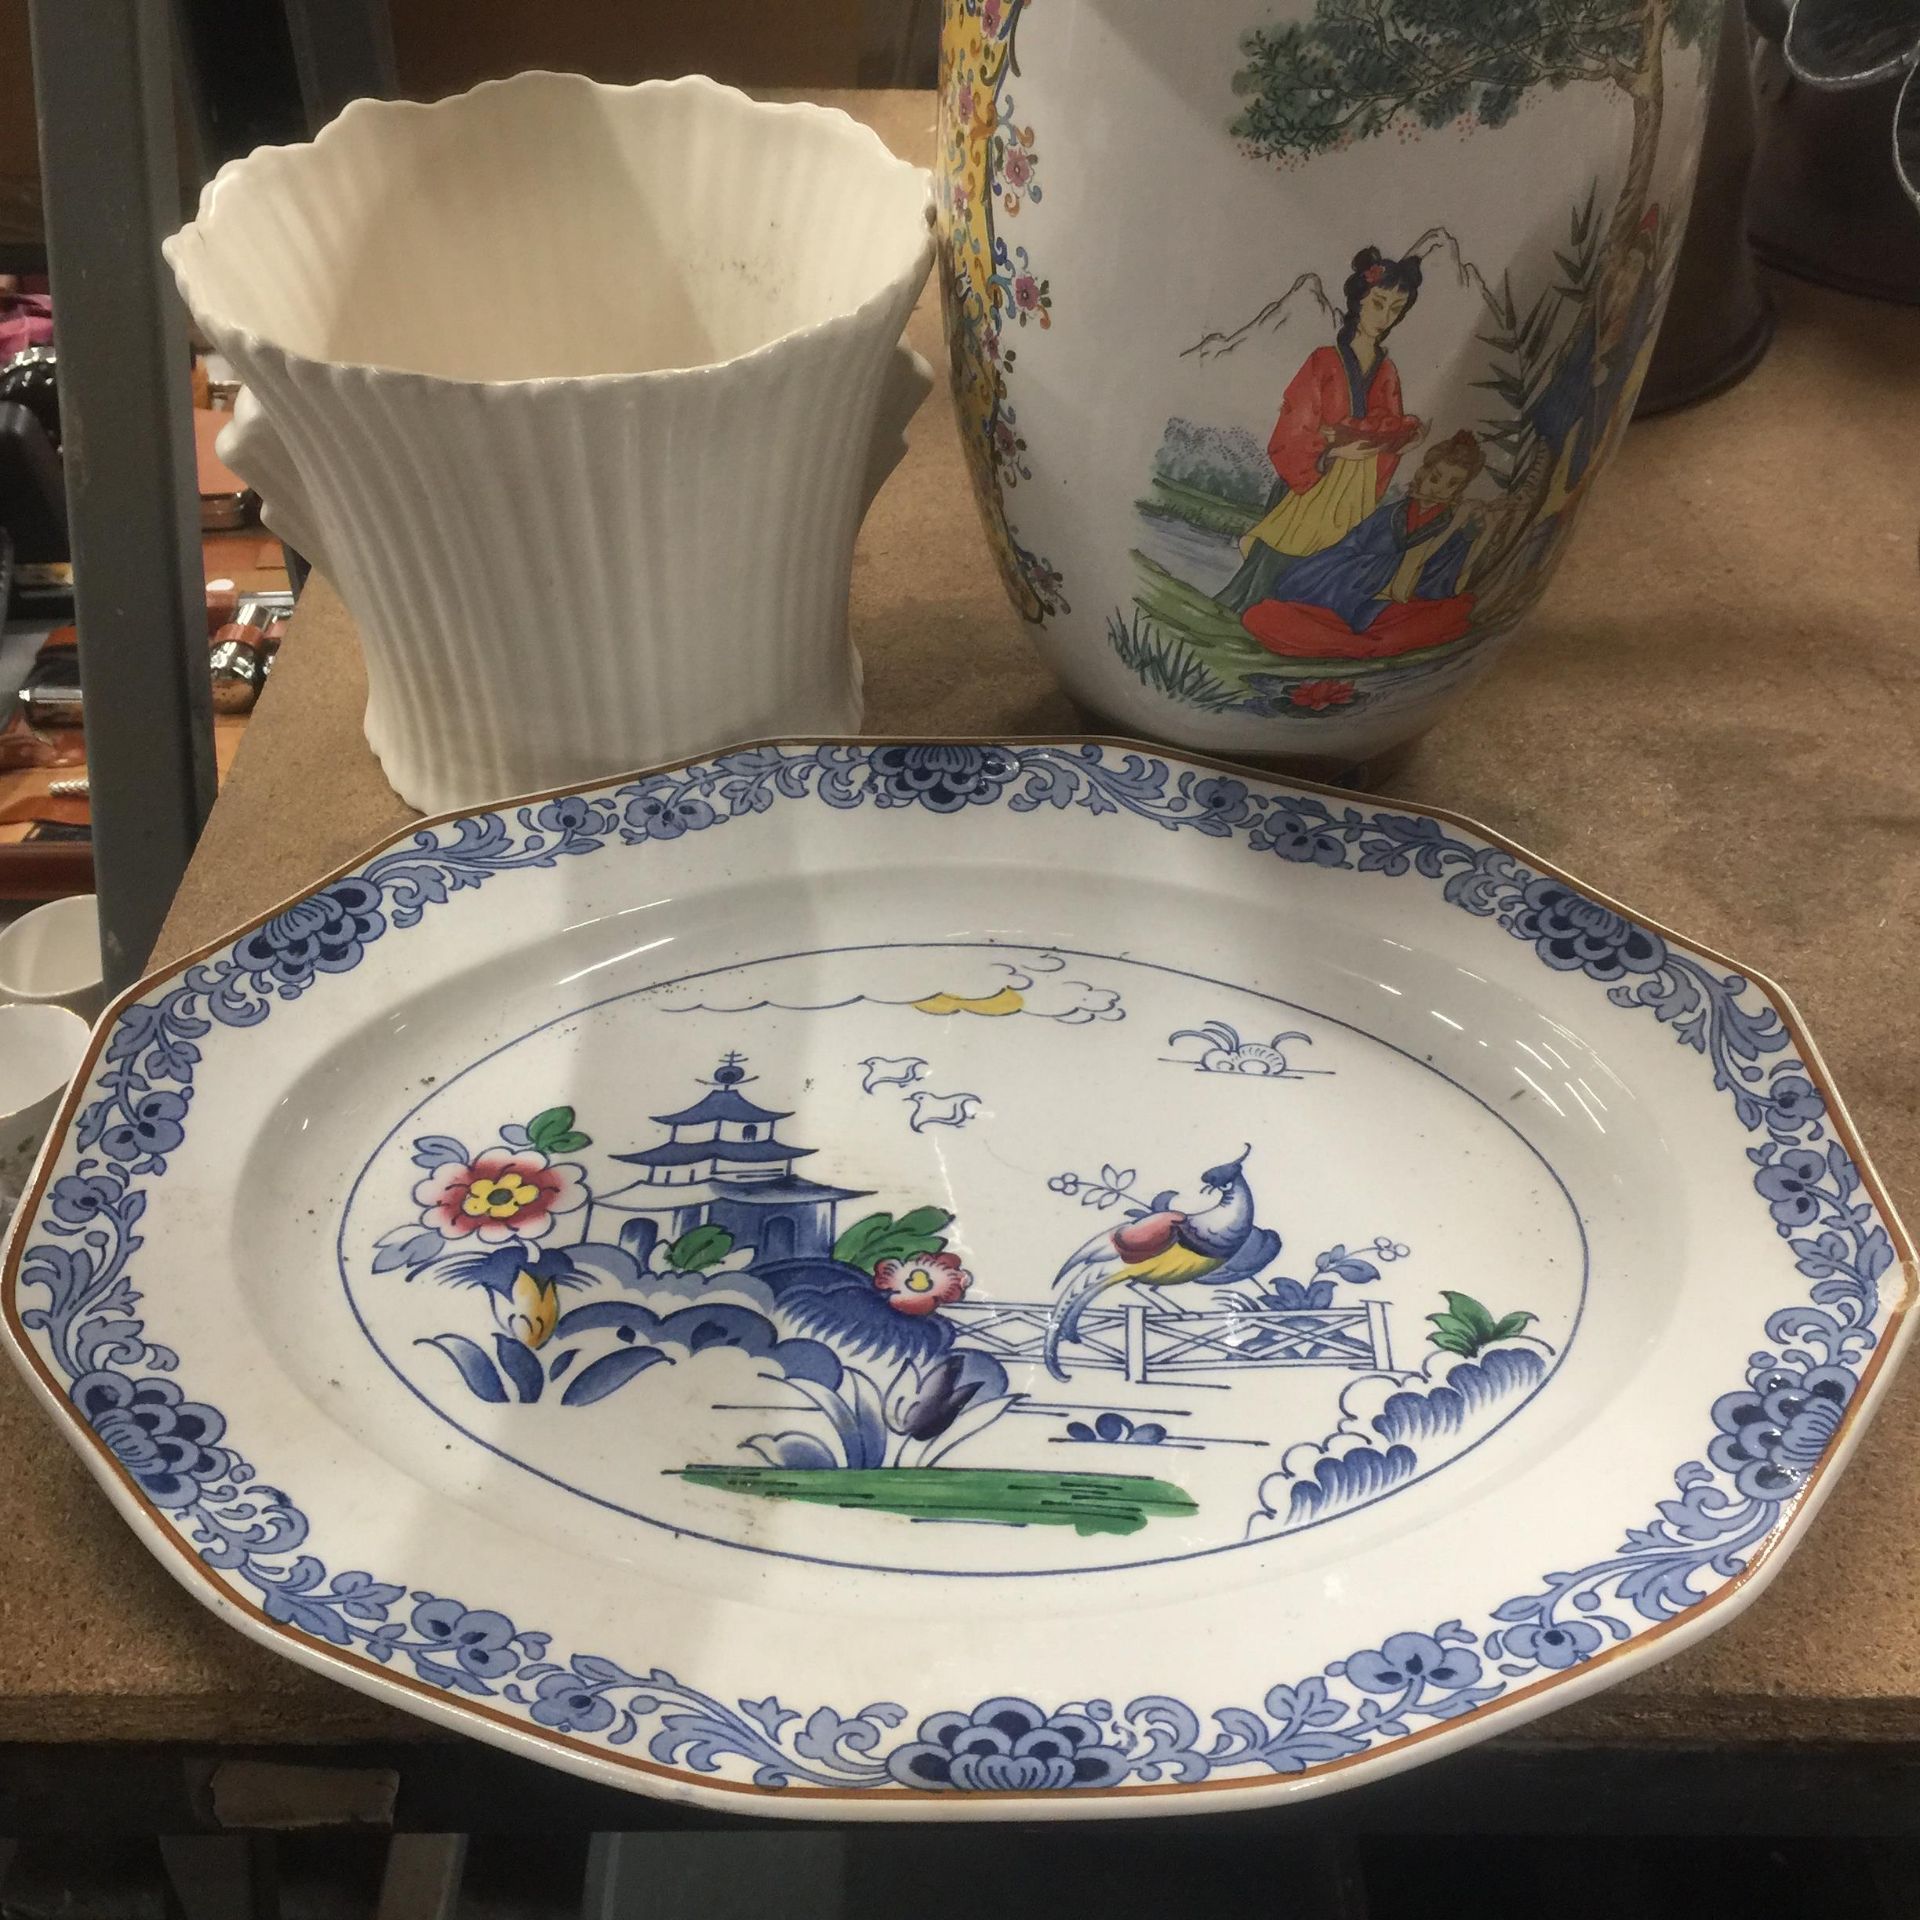 THREE LARGE CERAMIC ITEMS TO INCLUDE A LARGE ORIENTAL STYLE VASE, A MEAT PLATTER WITH BIRD DESIGN - Image 2 of 5